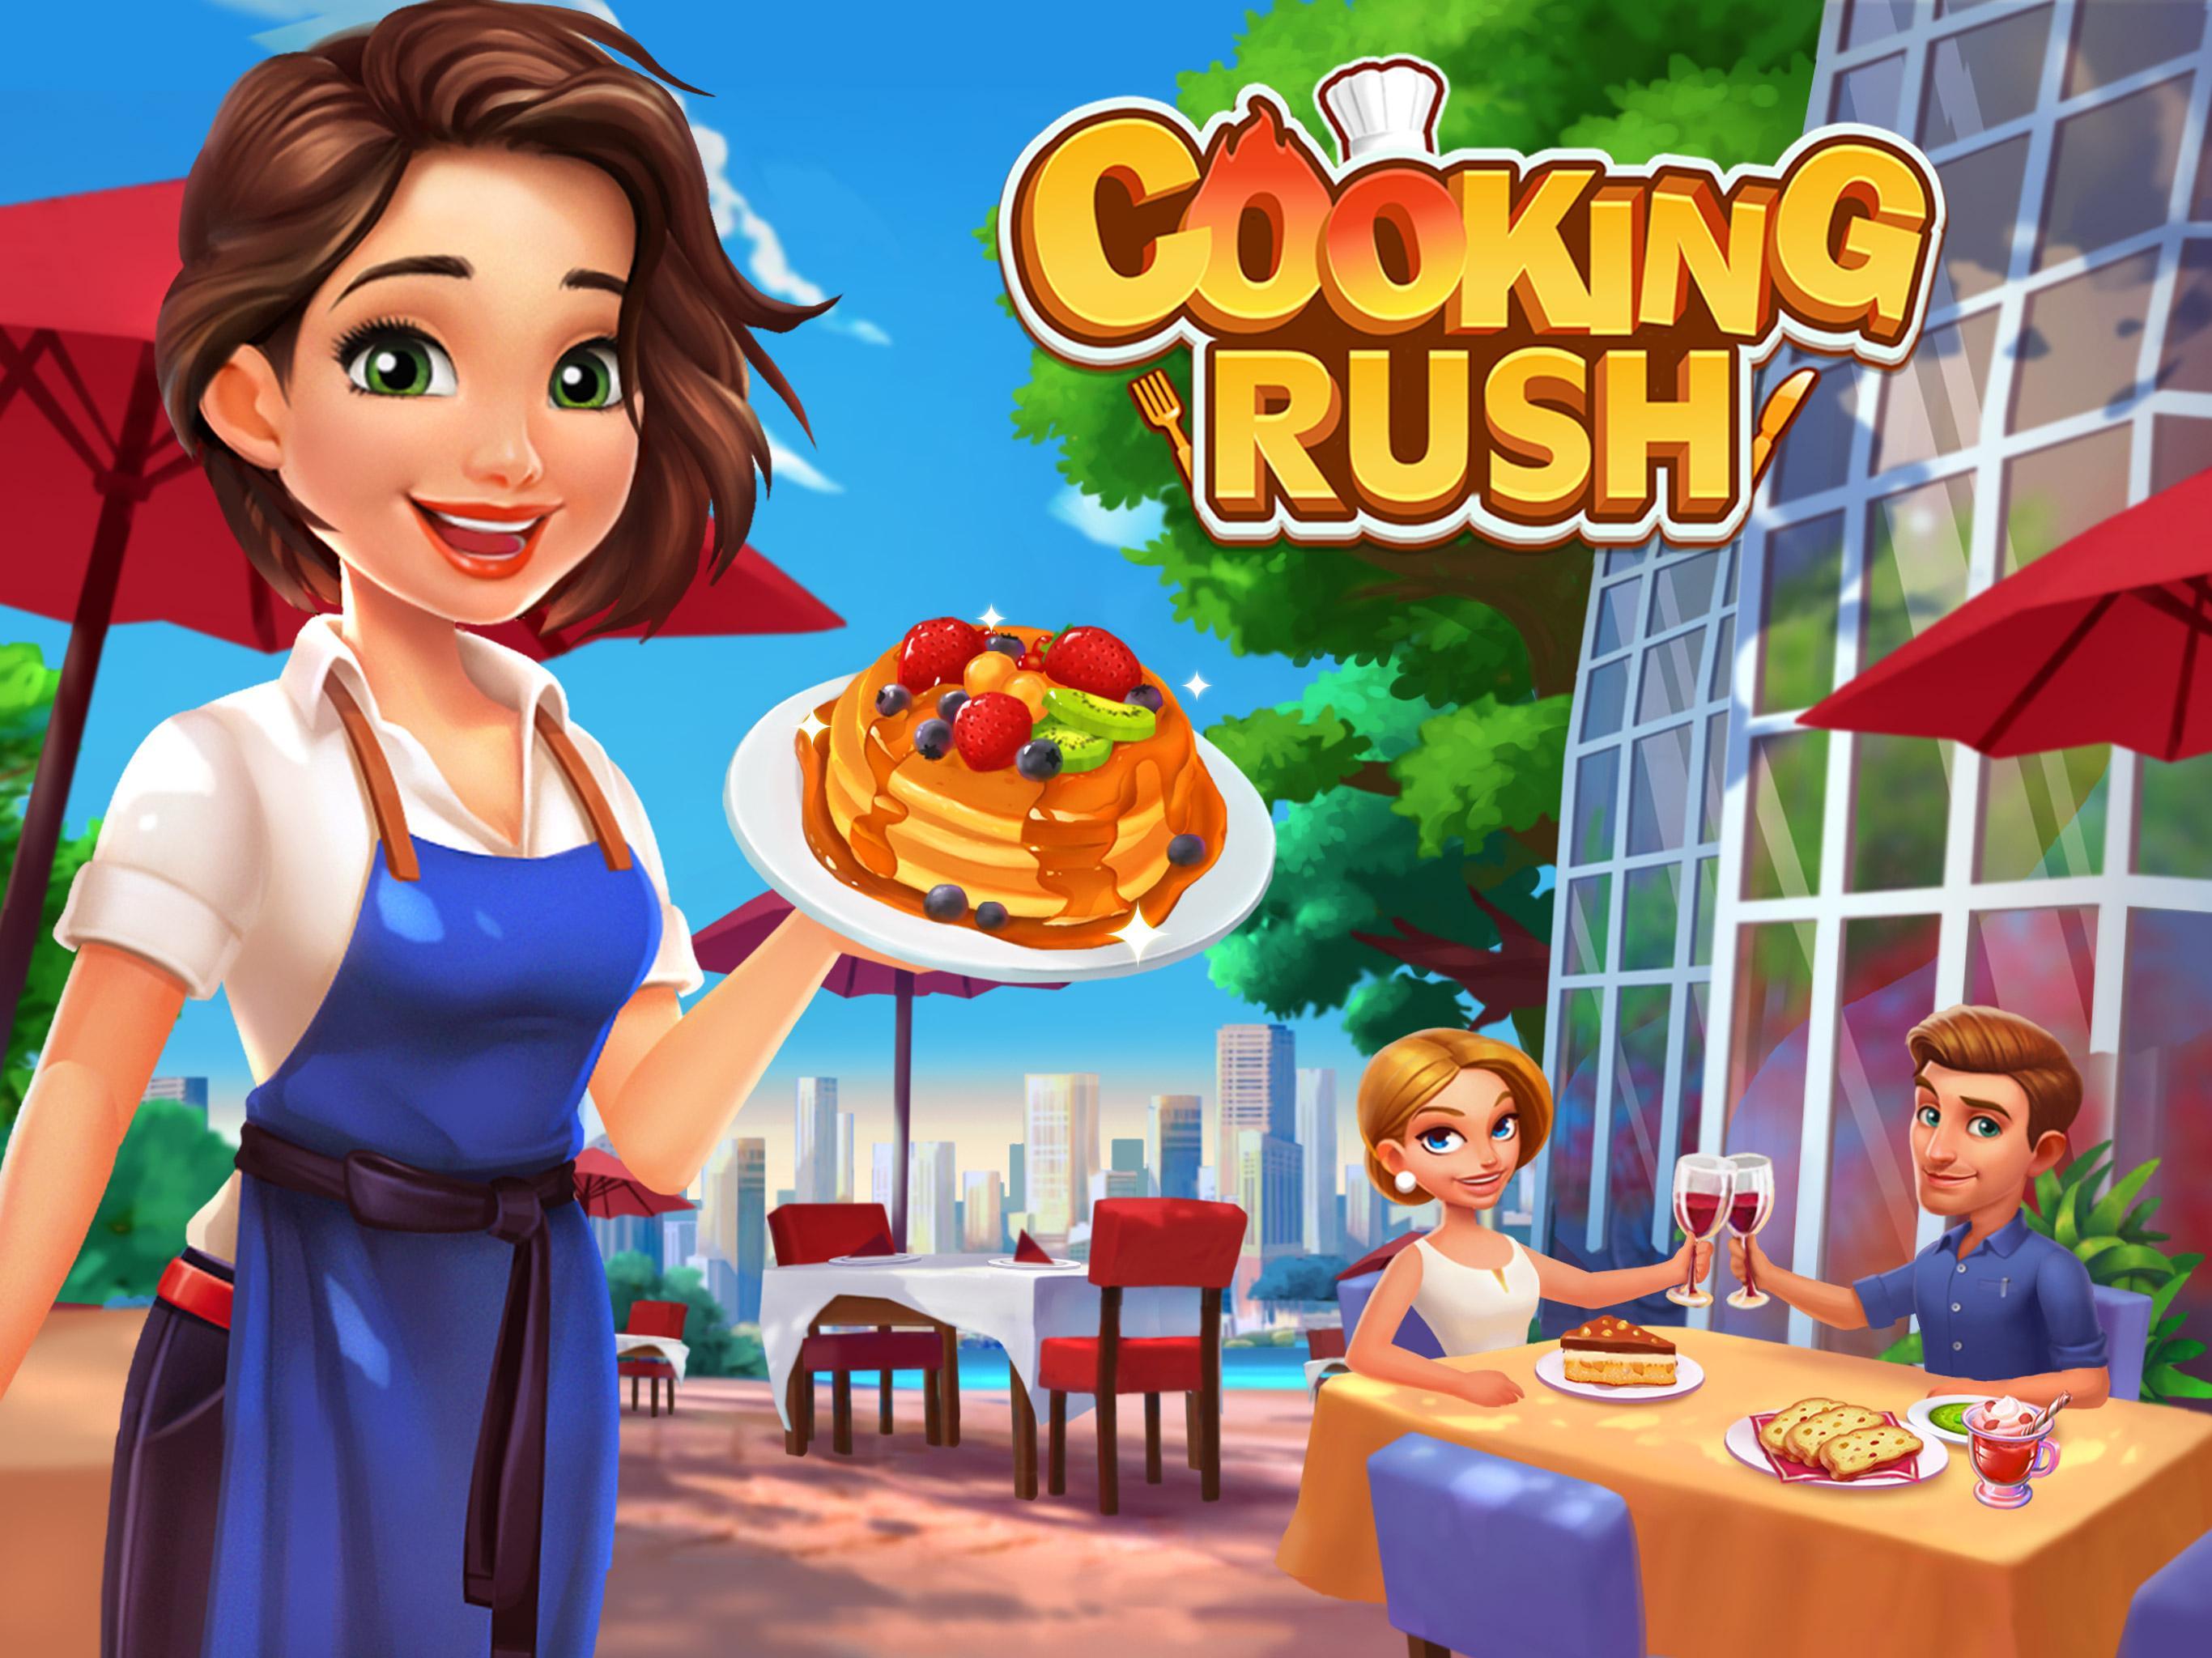 Cooking Rush - Chef's Fever Gamesのキャプチャ